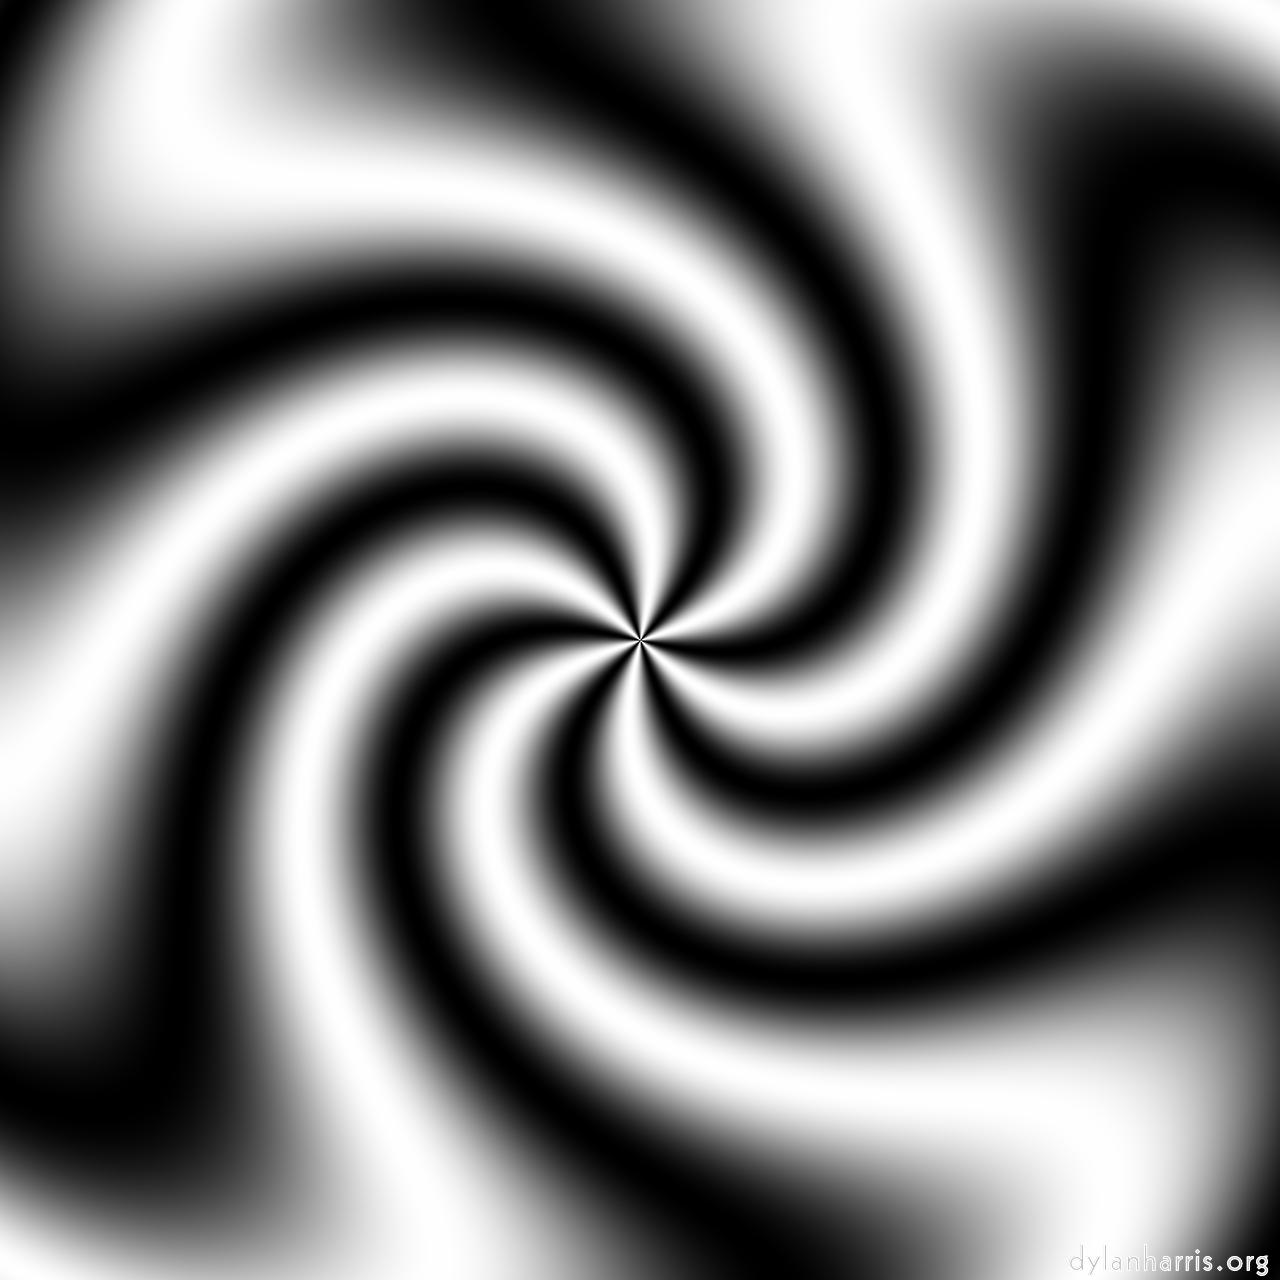 image: general examples (press action) :: swirl